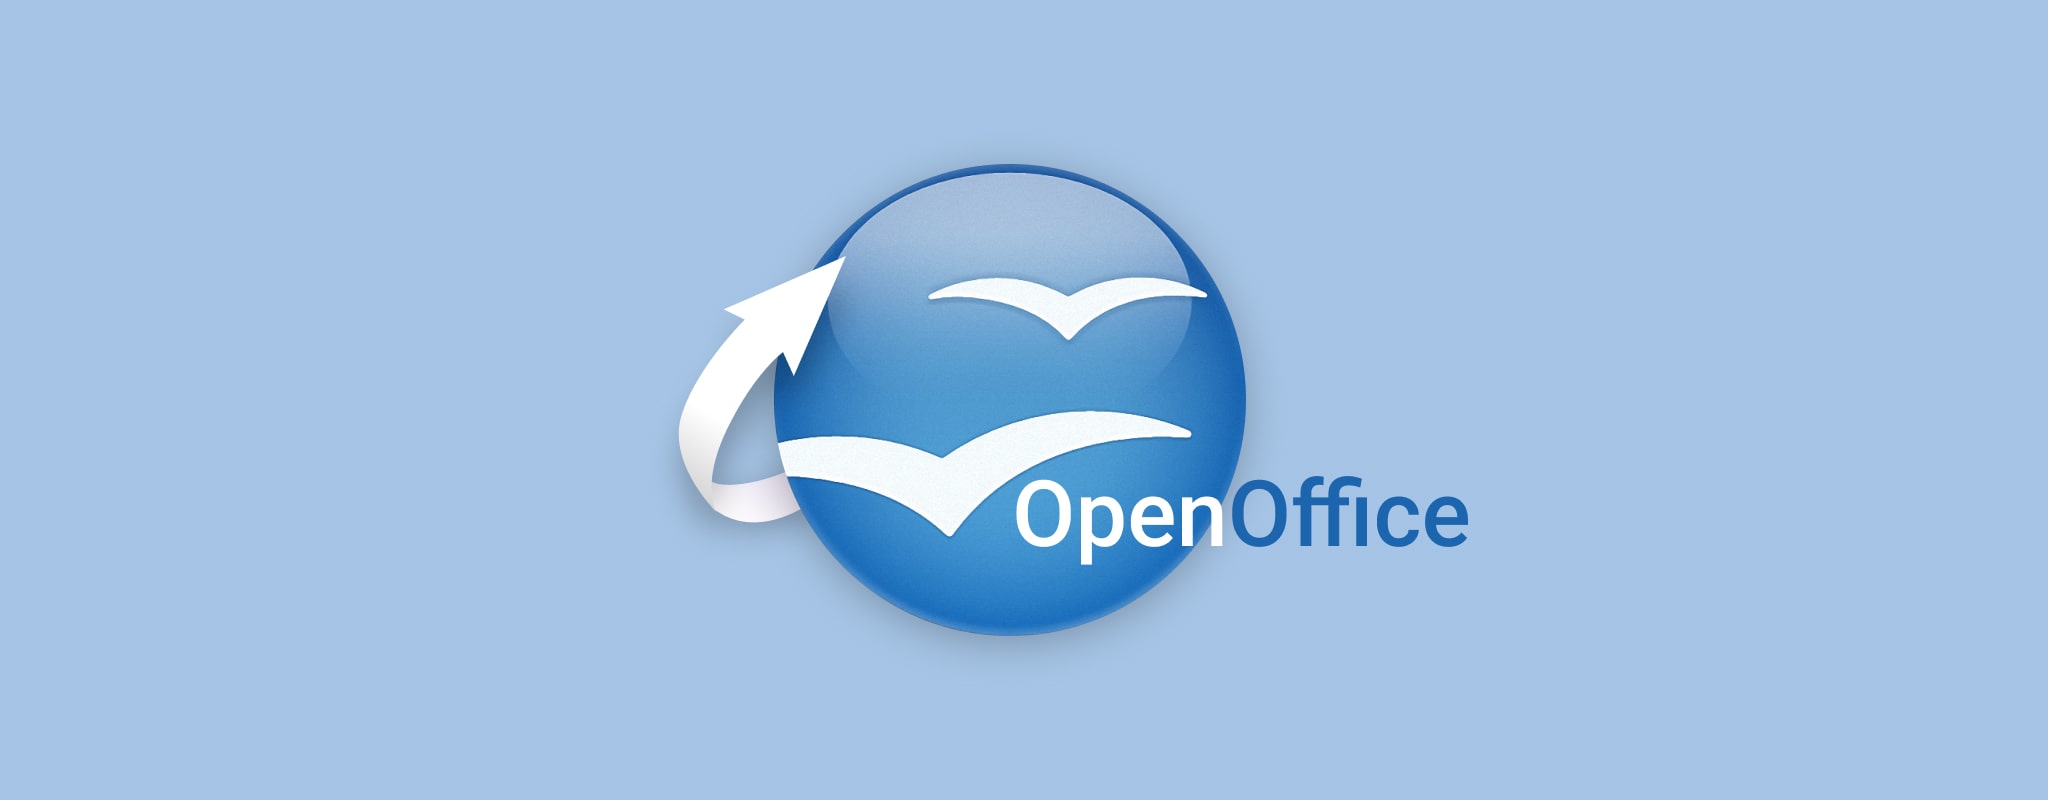 recover openoffice document